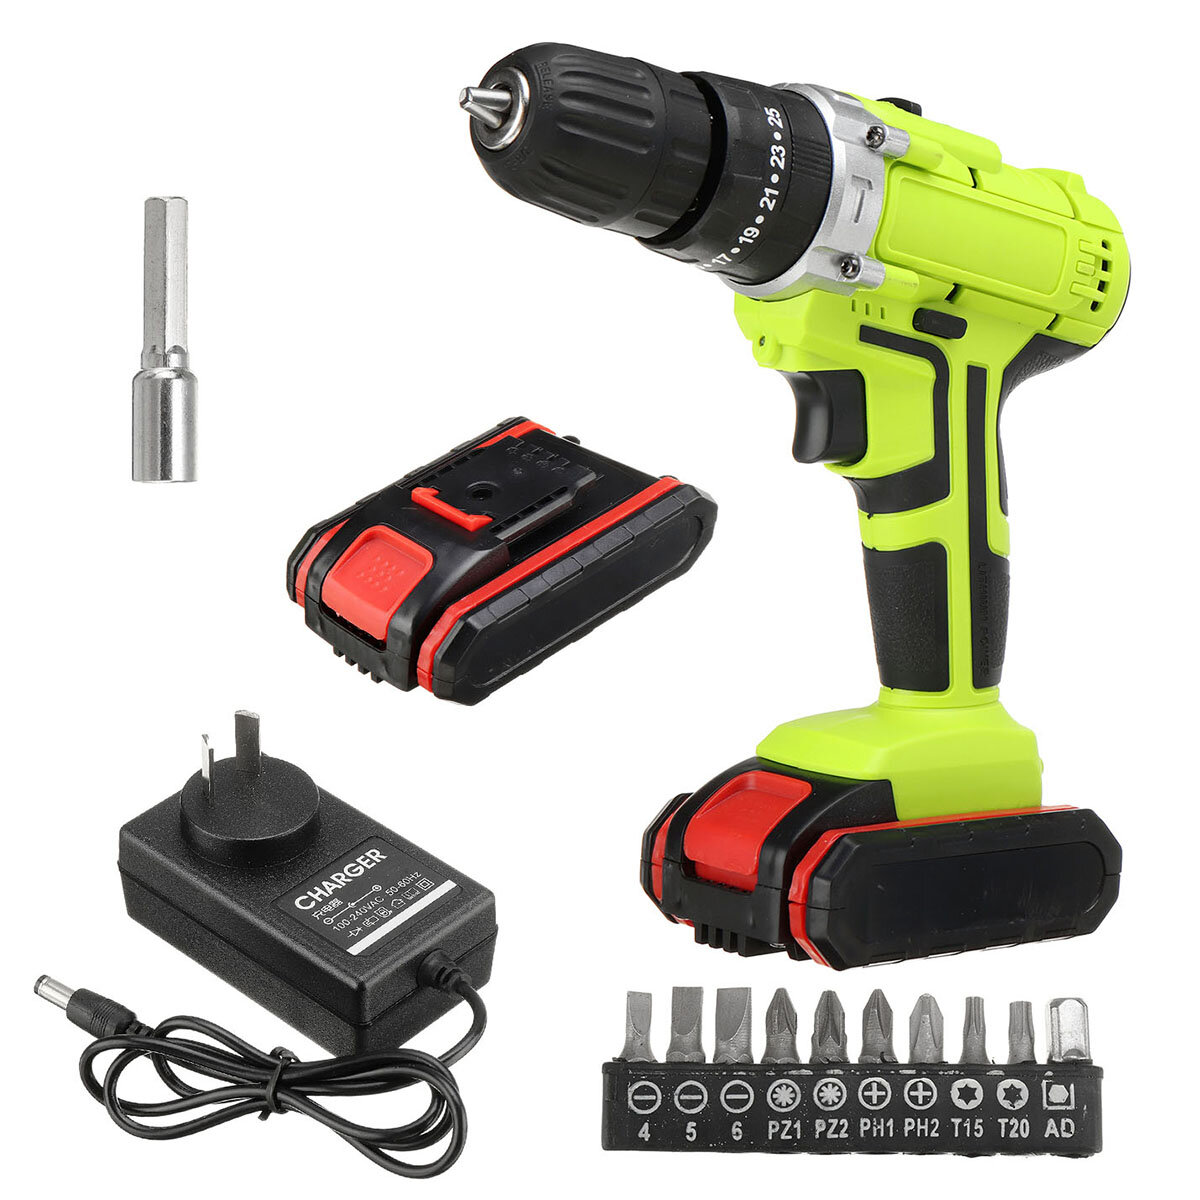 48VF 22800mAh Cordless Rechargable 3 In 1 Power Drills Impact Electric Drill Driver With 2Pcs Batter